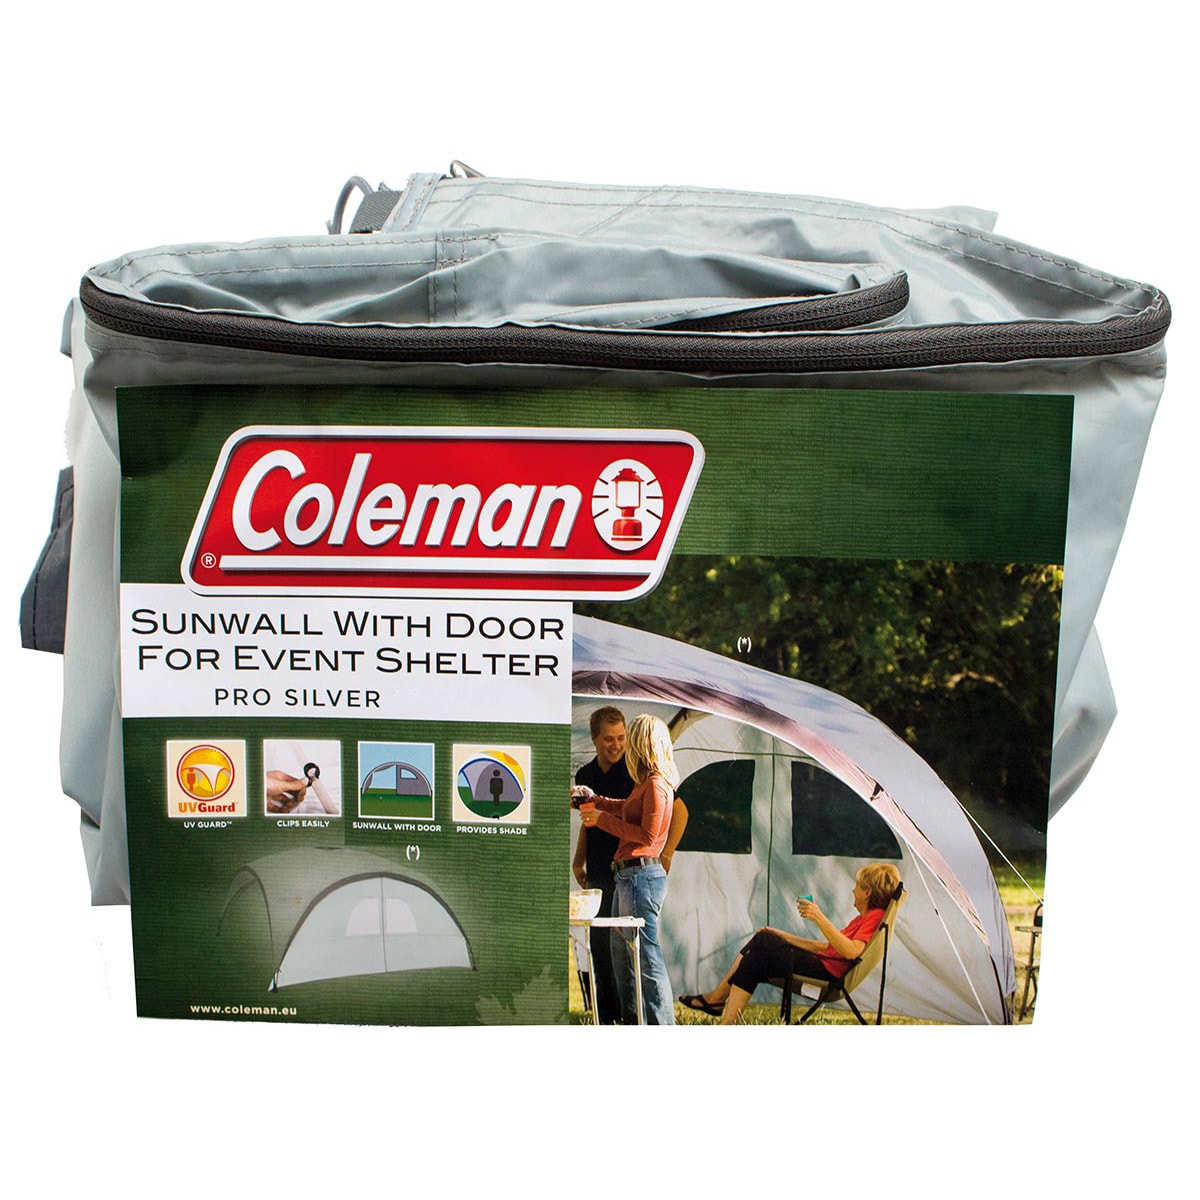 Drzwi Coleman Sunwall Door do wiaty namiotowej Event Shelter Pro XL Silver 